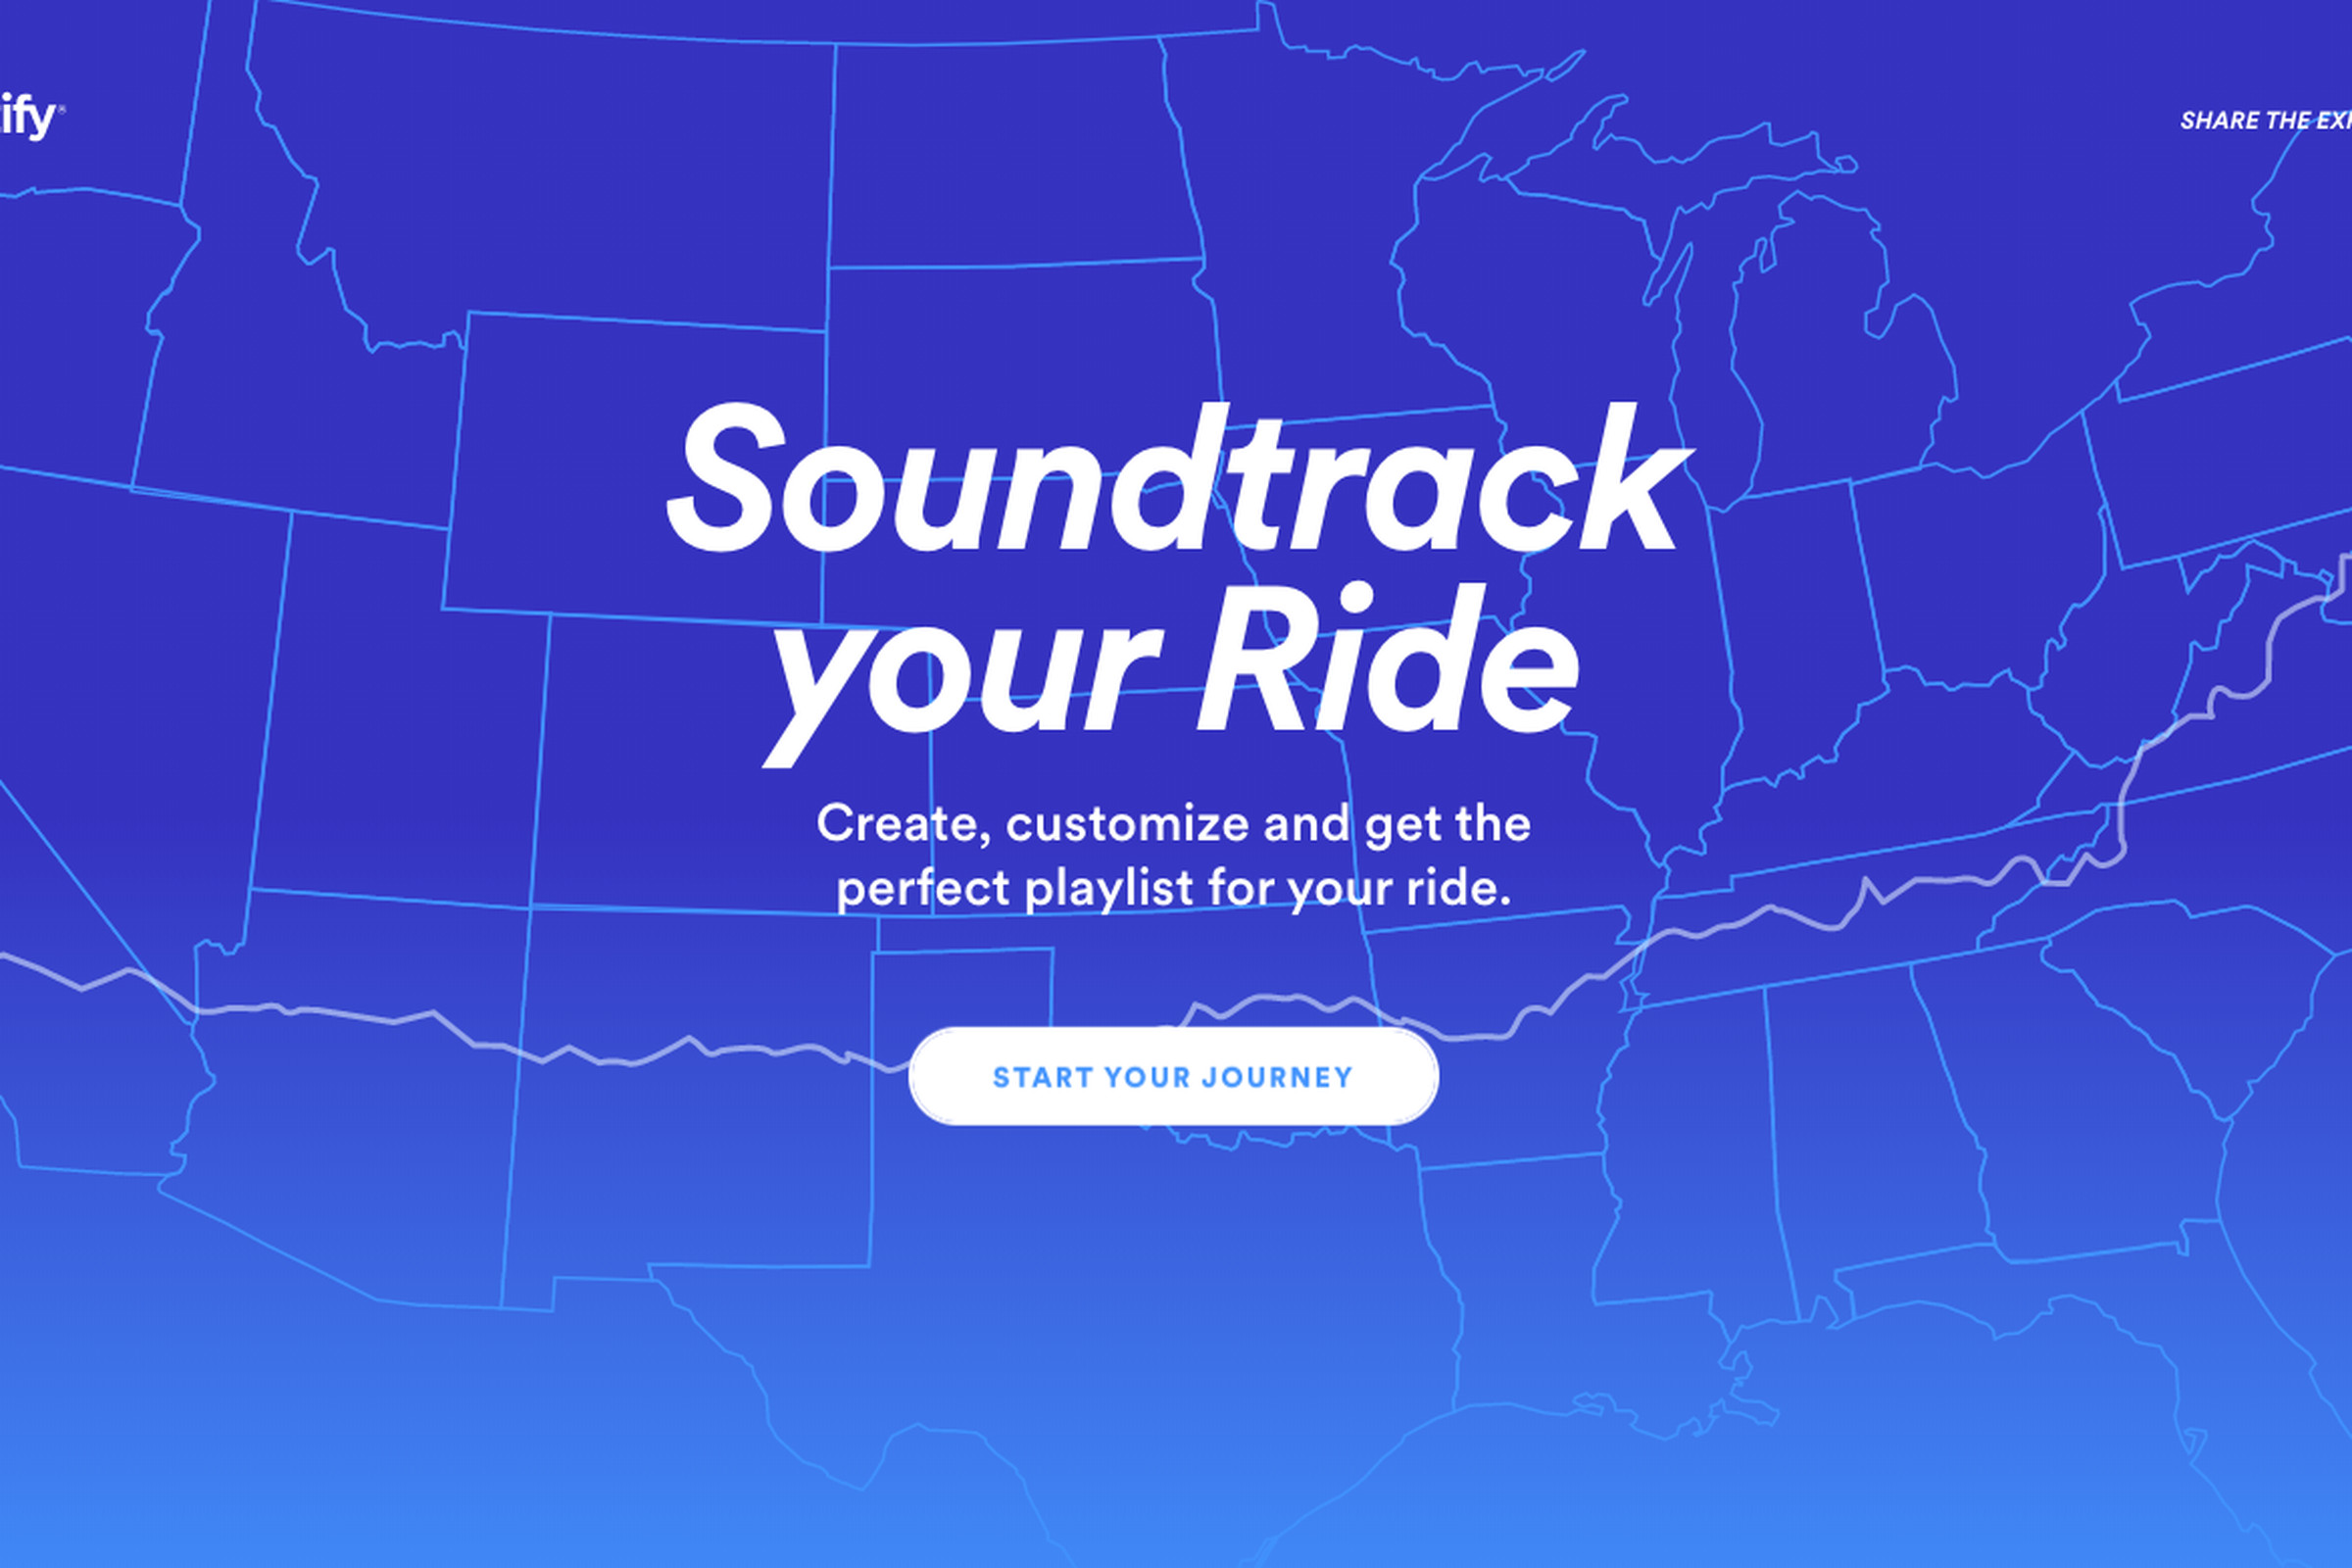 Spotify Soundtrack your Ride